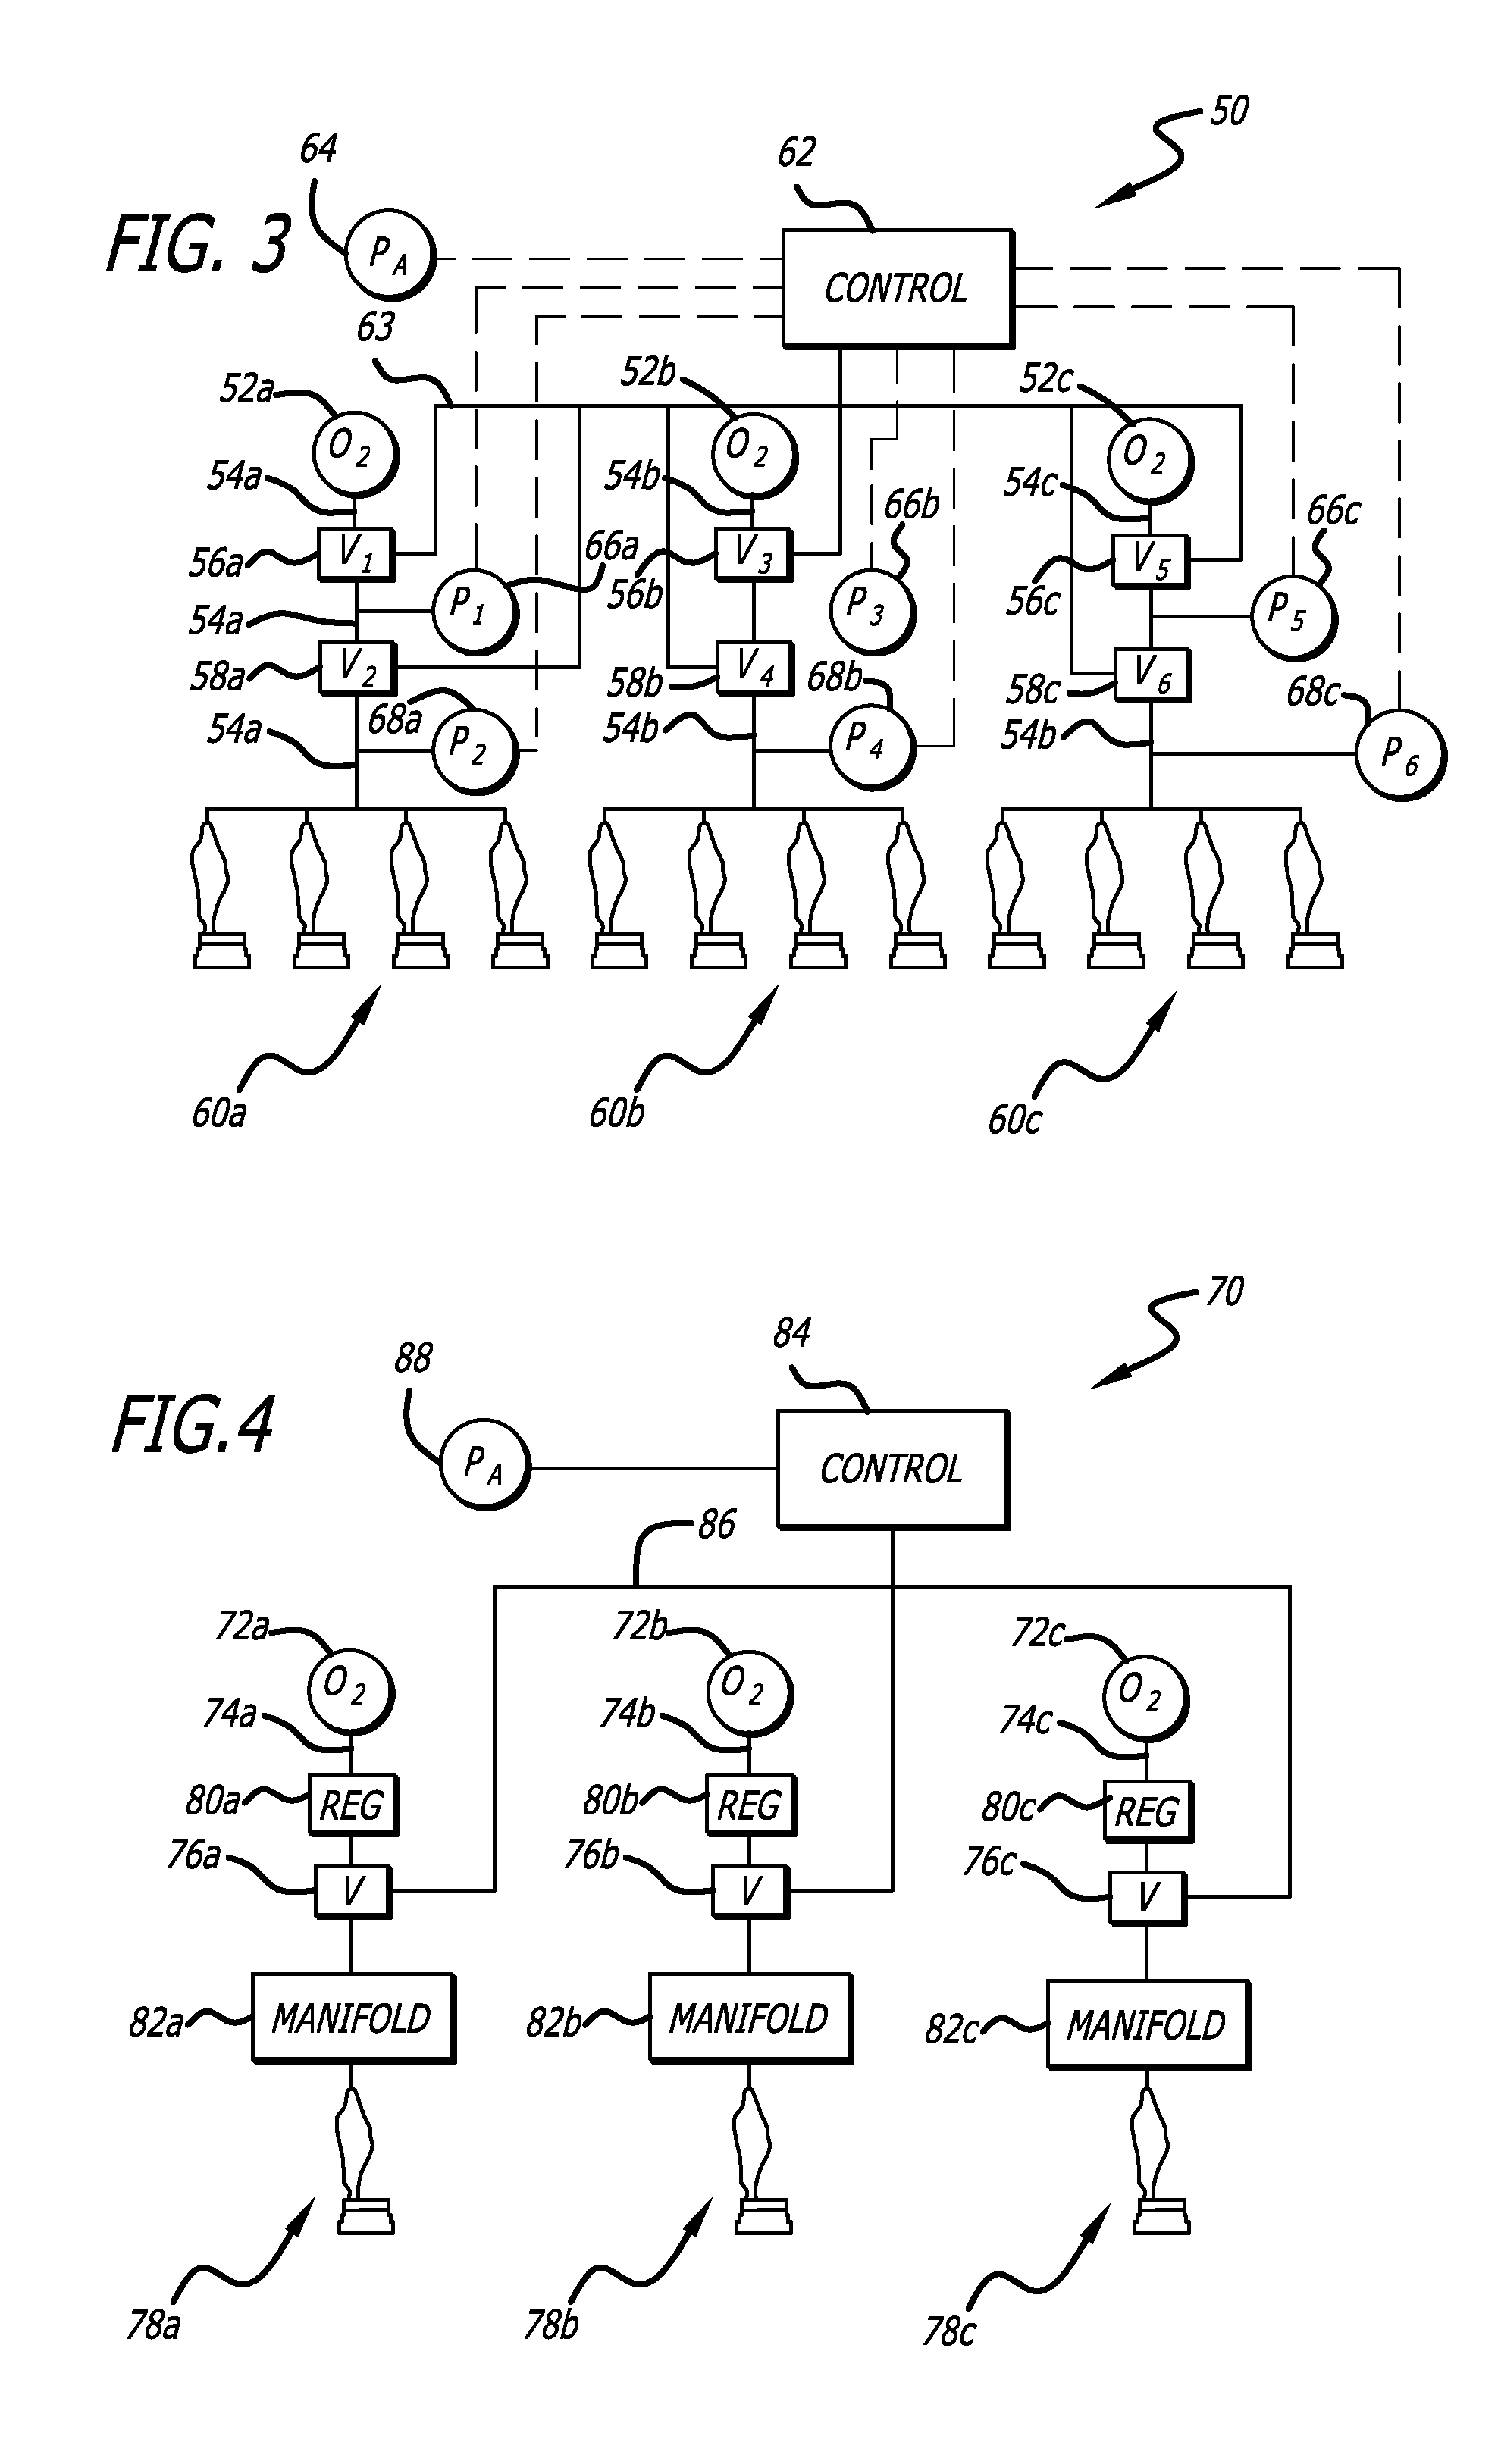 System for regulating the dispensing of commercial aircraft passenger oxygen supply